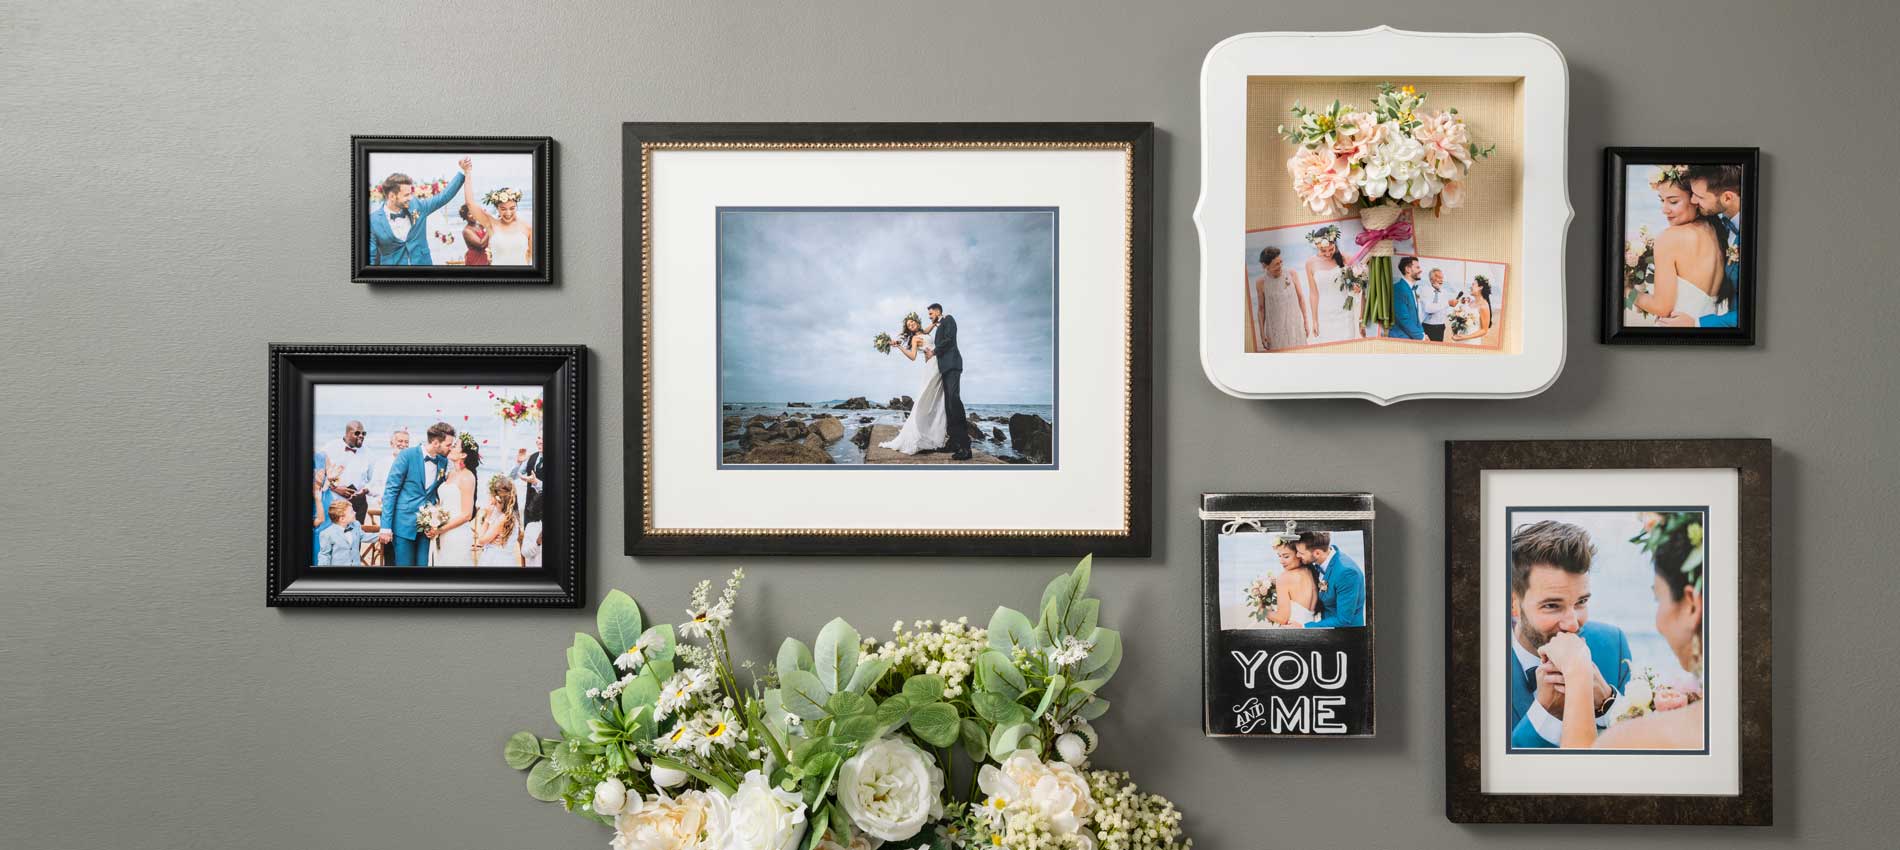 Custom Picture Framing Craft Warehouse